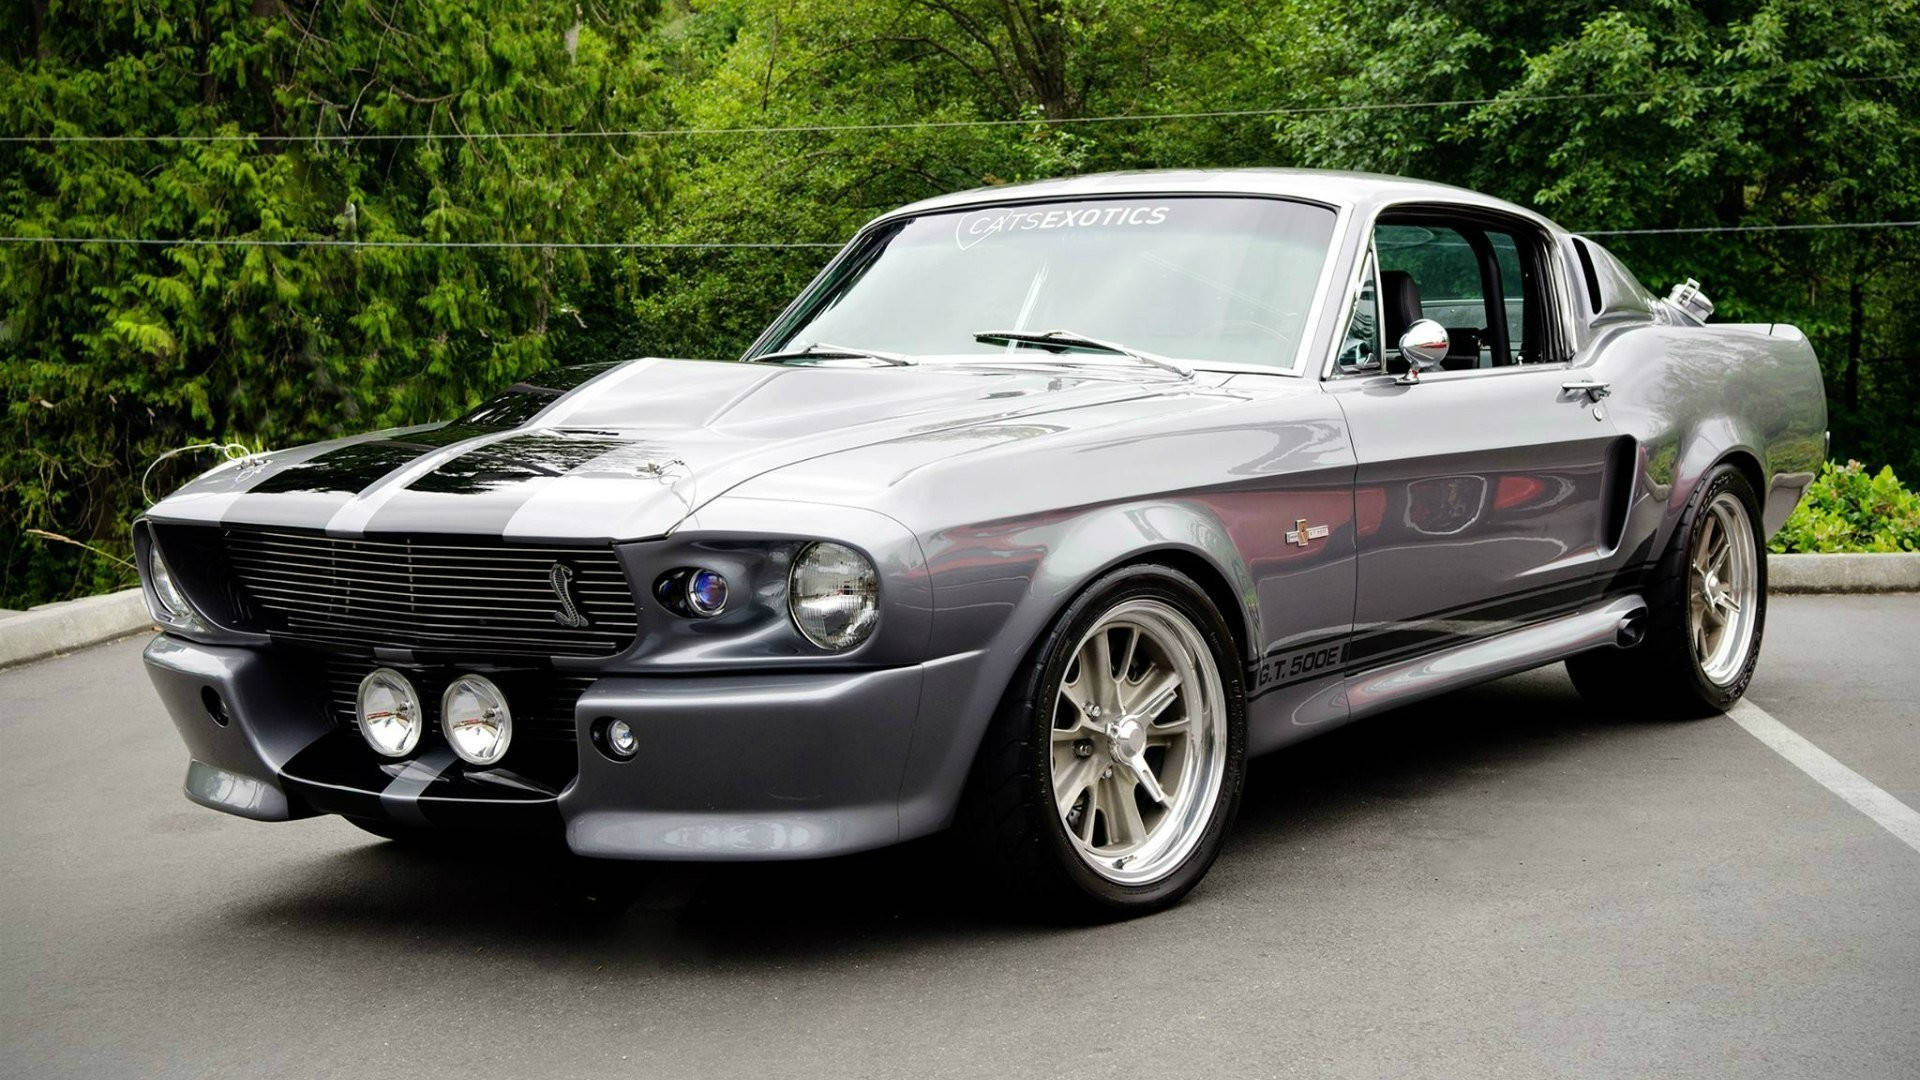 Gray Ford Mustang Hd Eleanor Background